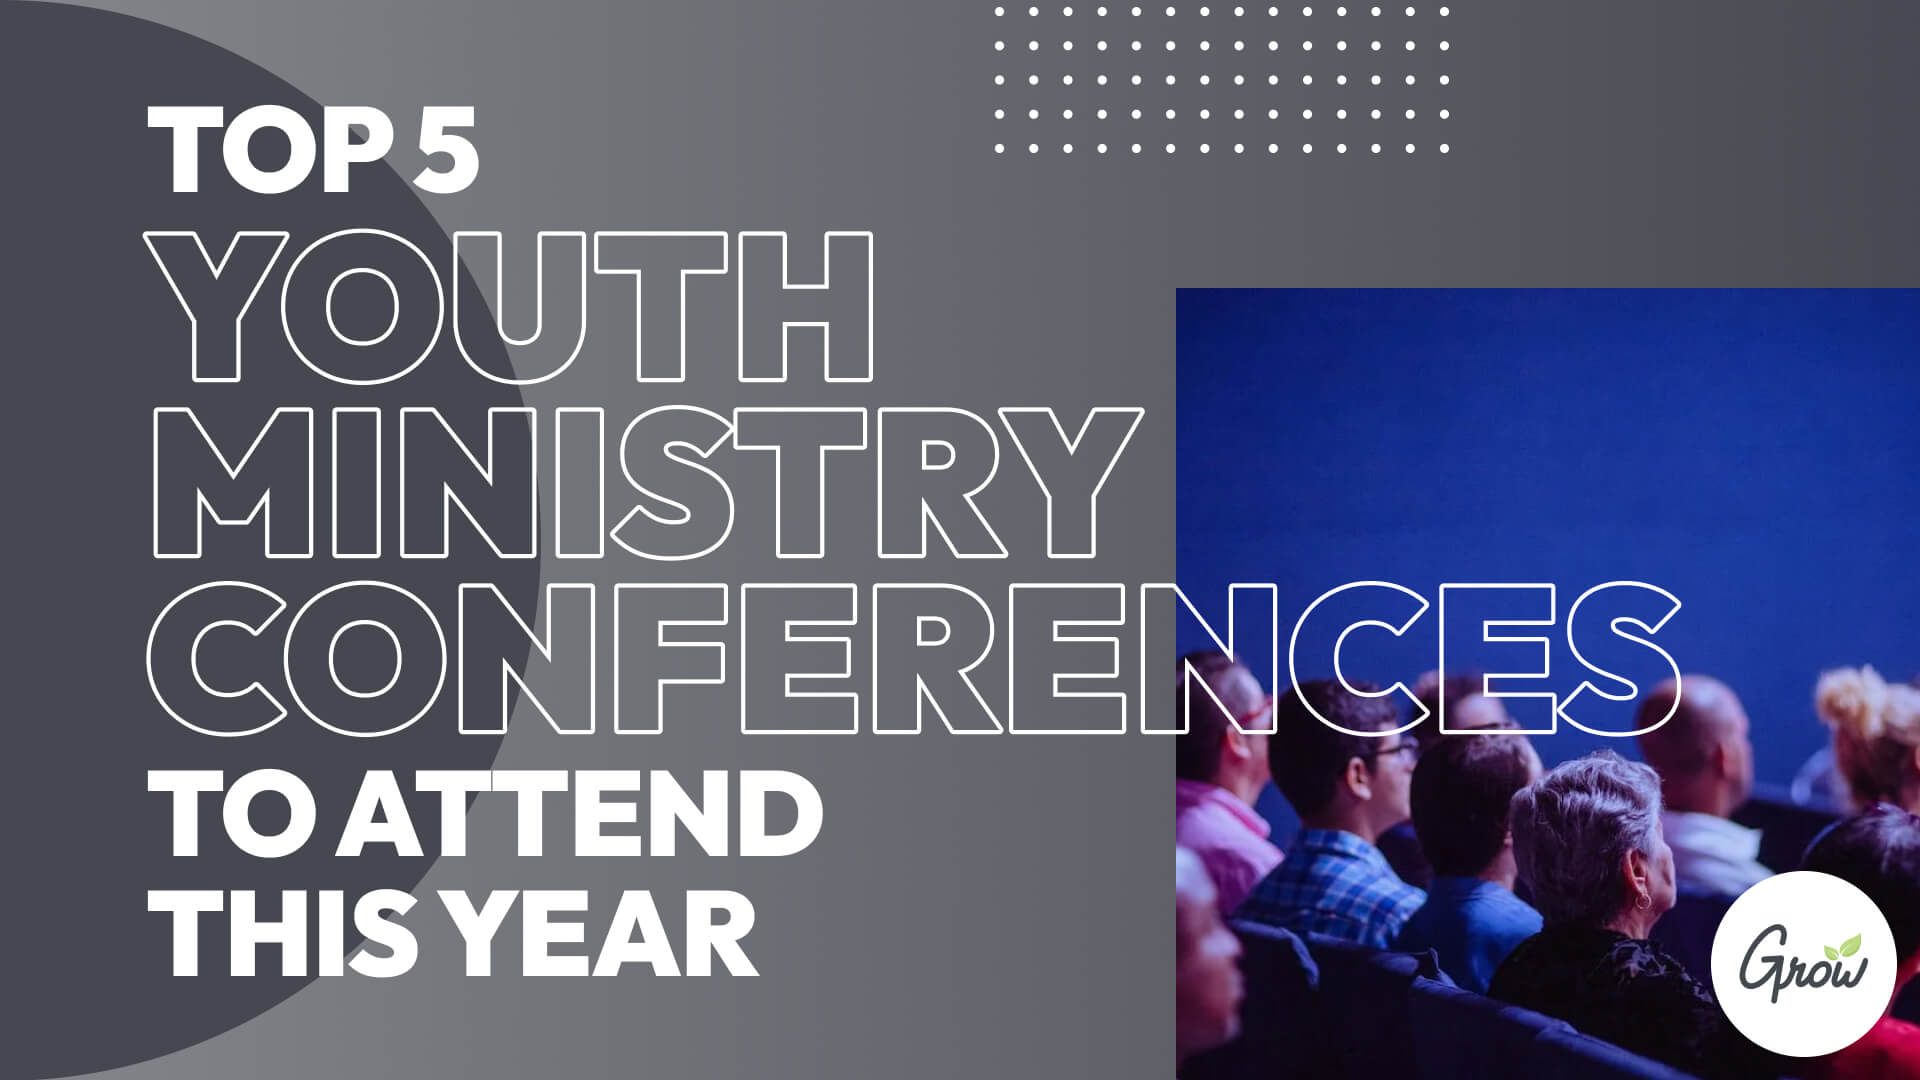 Top 5 Youth Ministry Conferences to Attend This Year